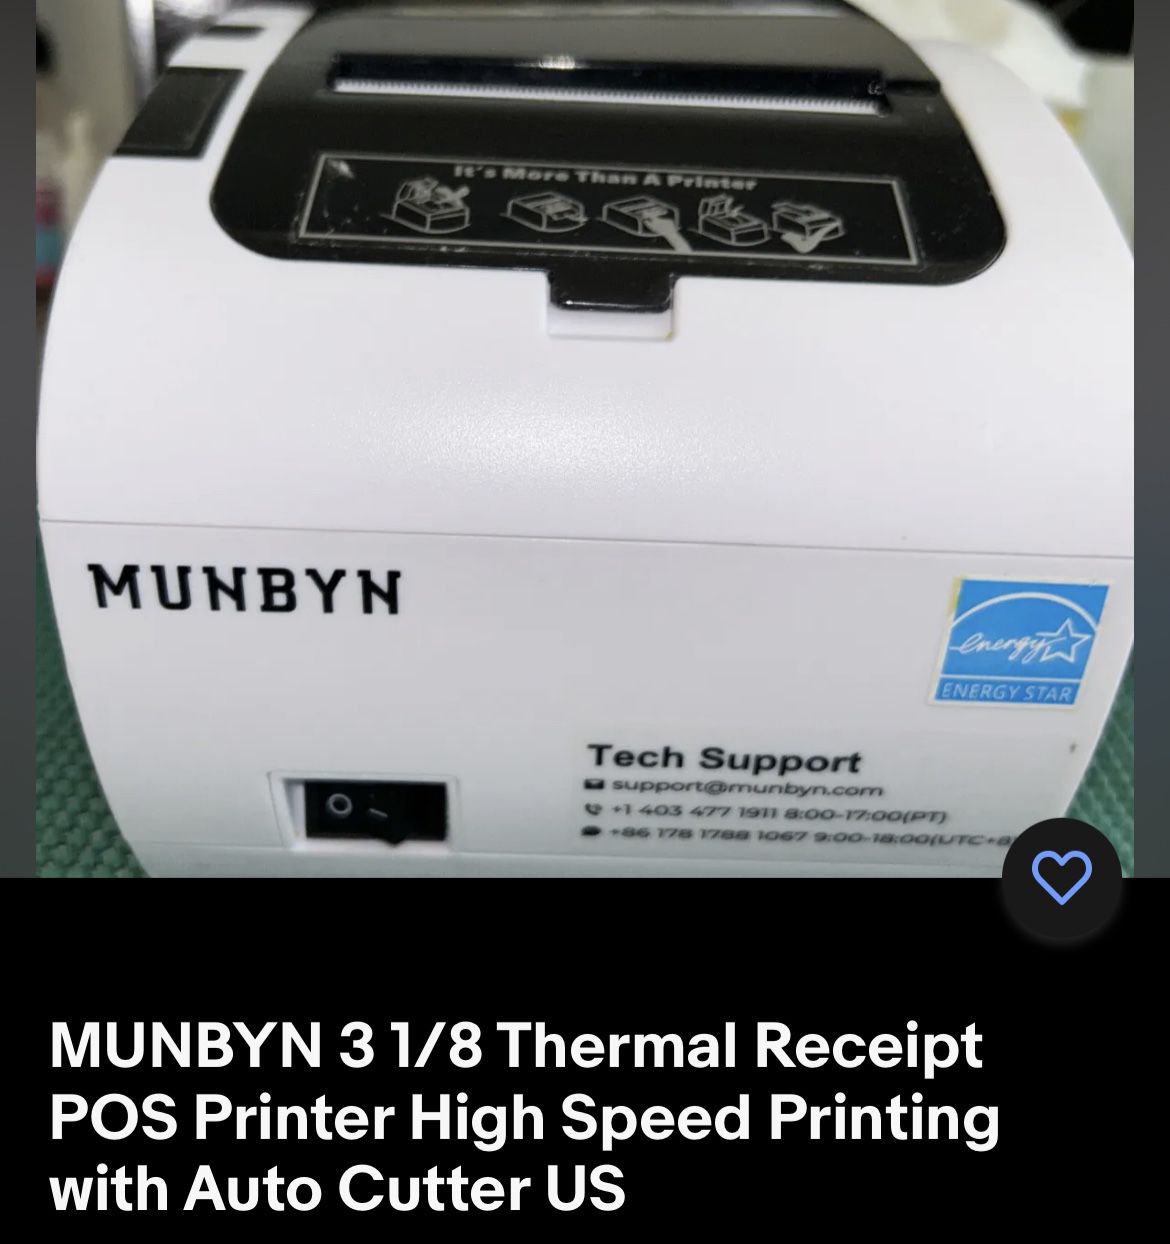 MUNBYN 3 1/8 Thermal Receipt POS Printer High Speed Printing with Auto Cutter US